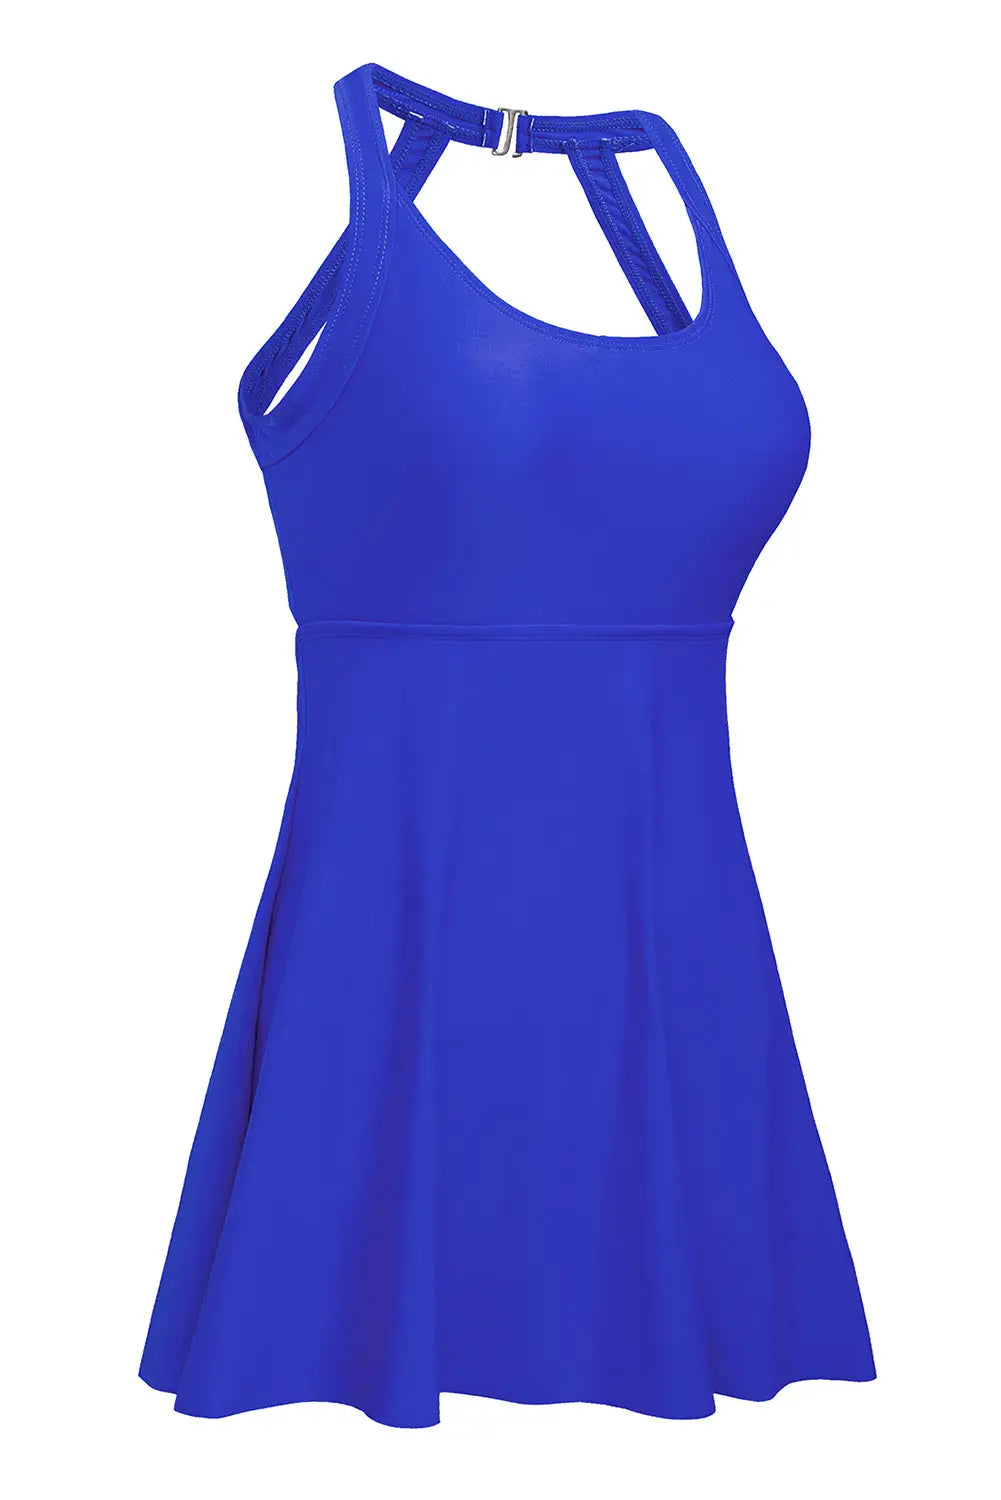 Blue strappy halterneck skirt style one piece swimsuit - swimsuits